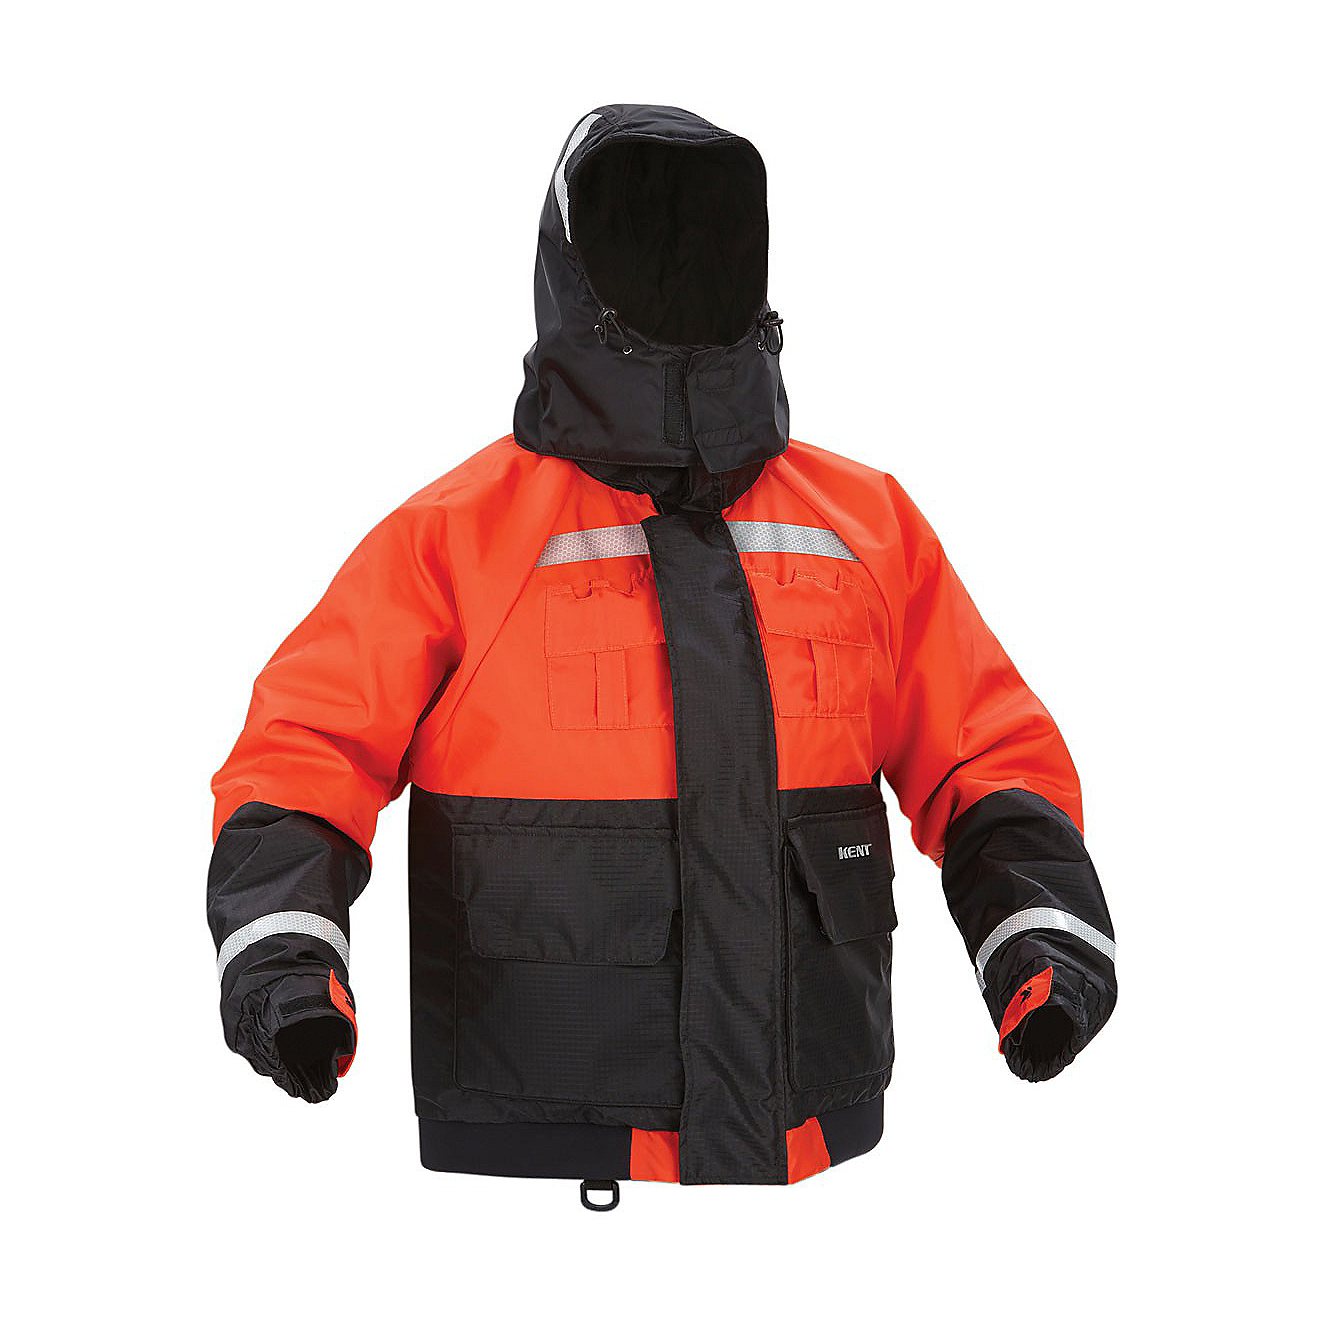 Onyx Outdoor Deluxe Flotation Jacket with ArcticShield Technology Hood                                                           - view number 1